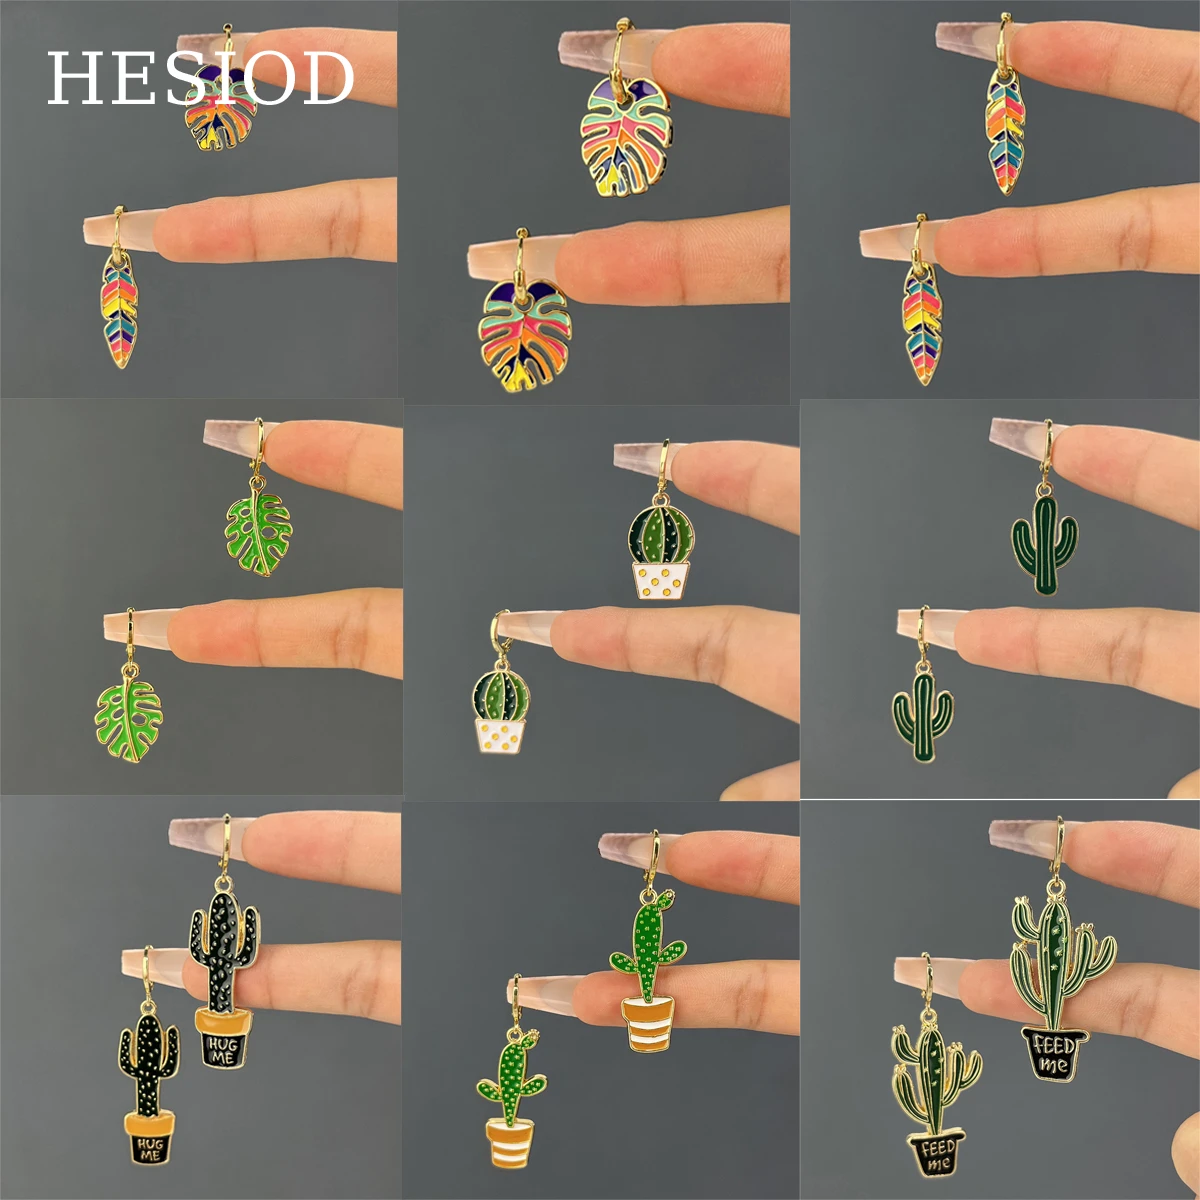 

Hot Summer Tropic Leaf Cactus Pendant Hanging Dangle Earrings For Women Coloful Resin Piercing Jewelry Accessories Party Gifts